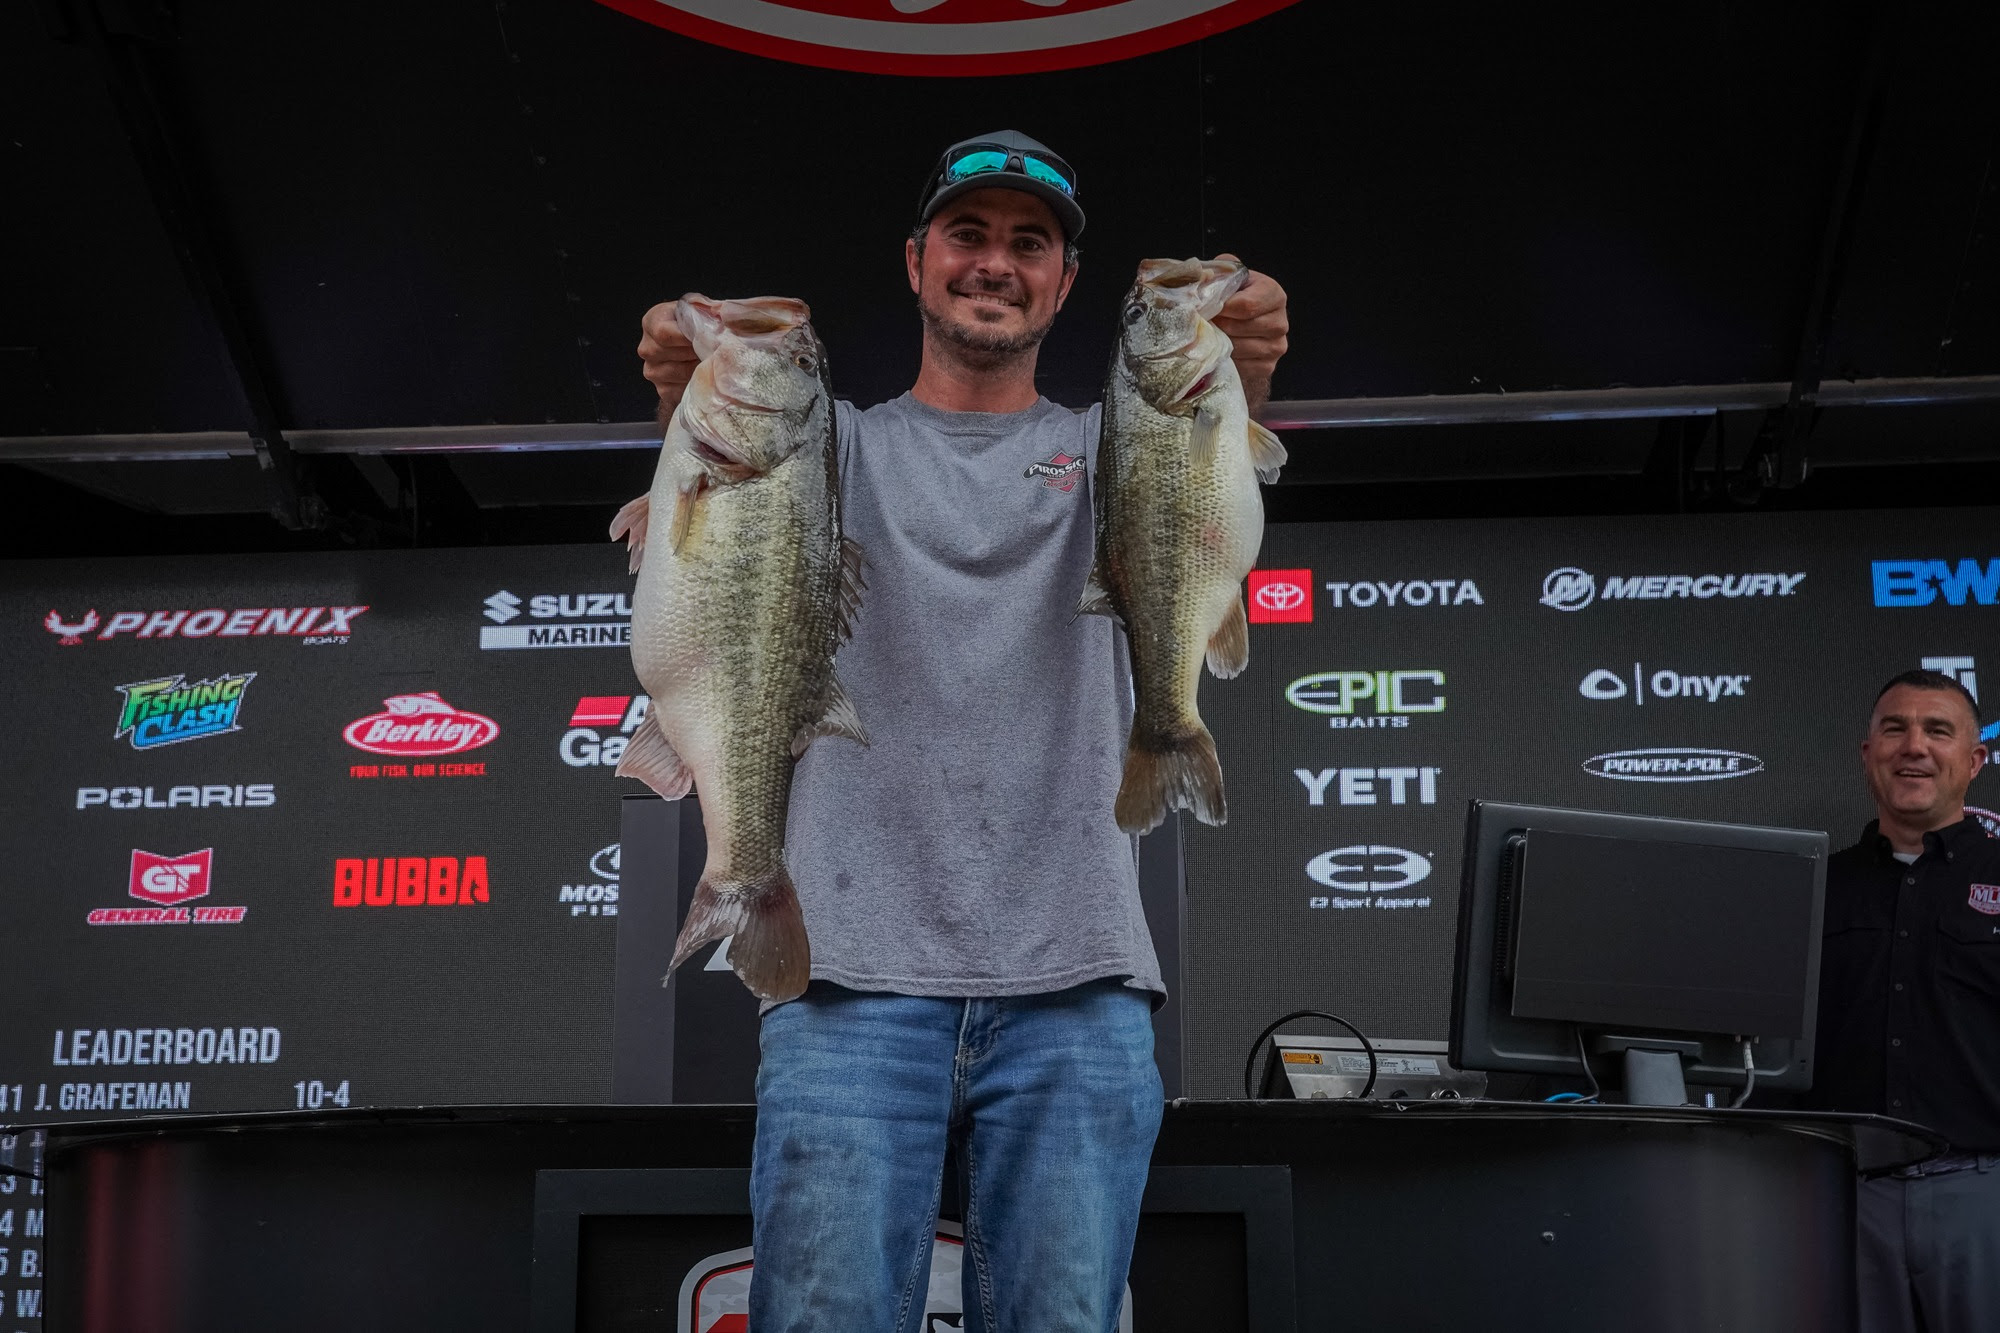 Missouri's Brock Reinkemeyer Leads Day 1 at Tackle Warehouse Invitational –  Anglers Channel